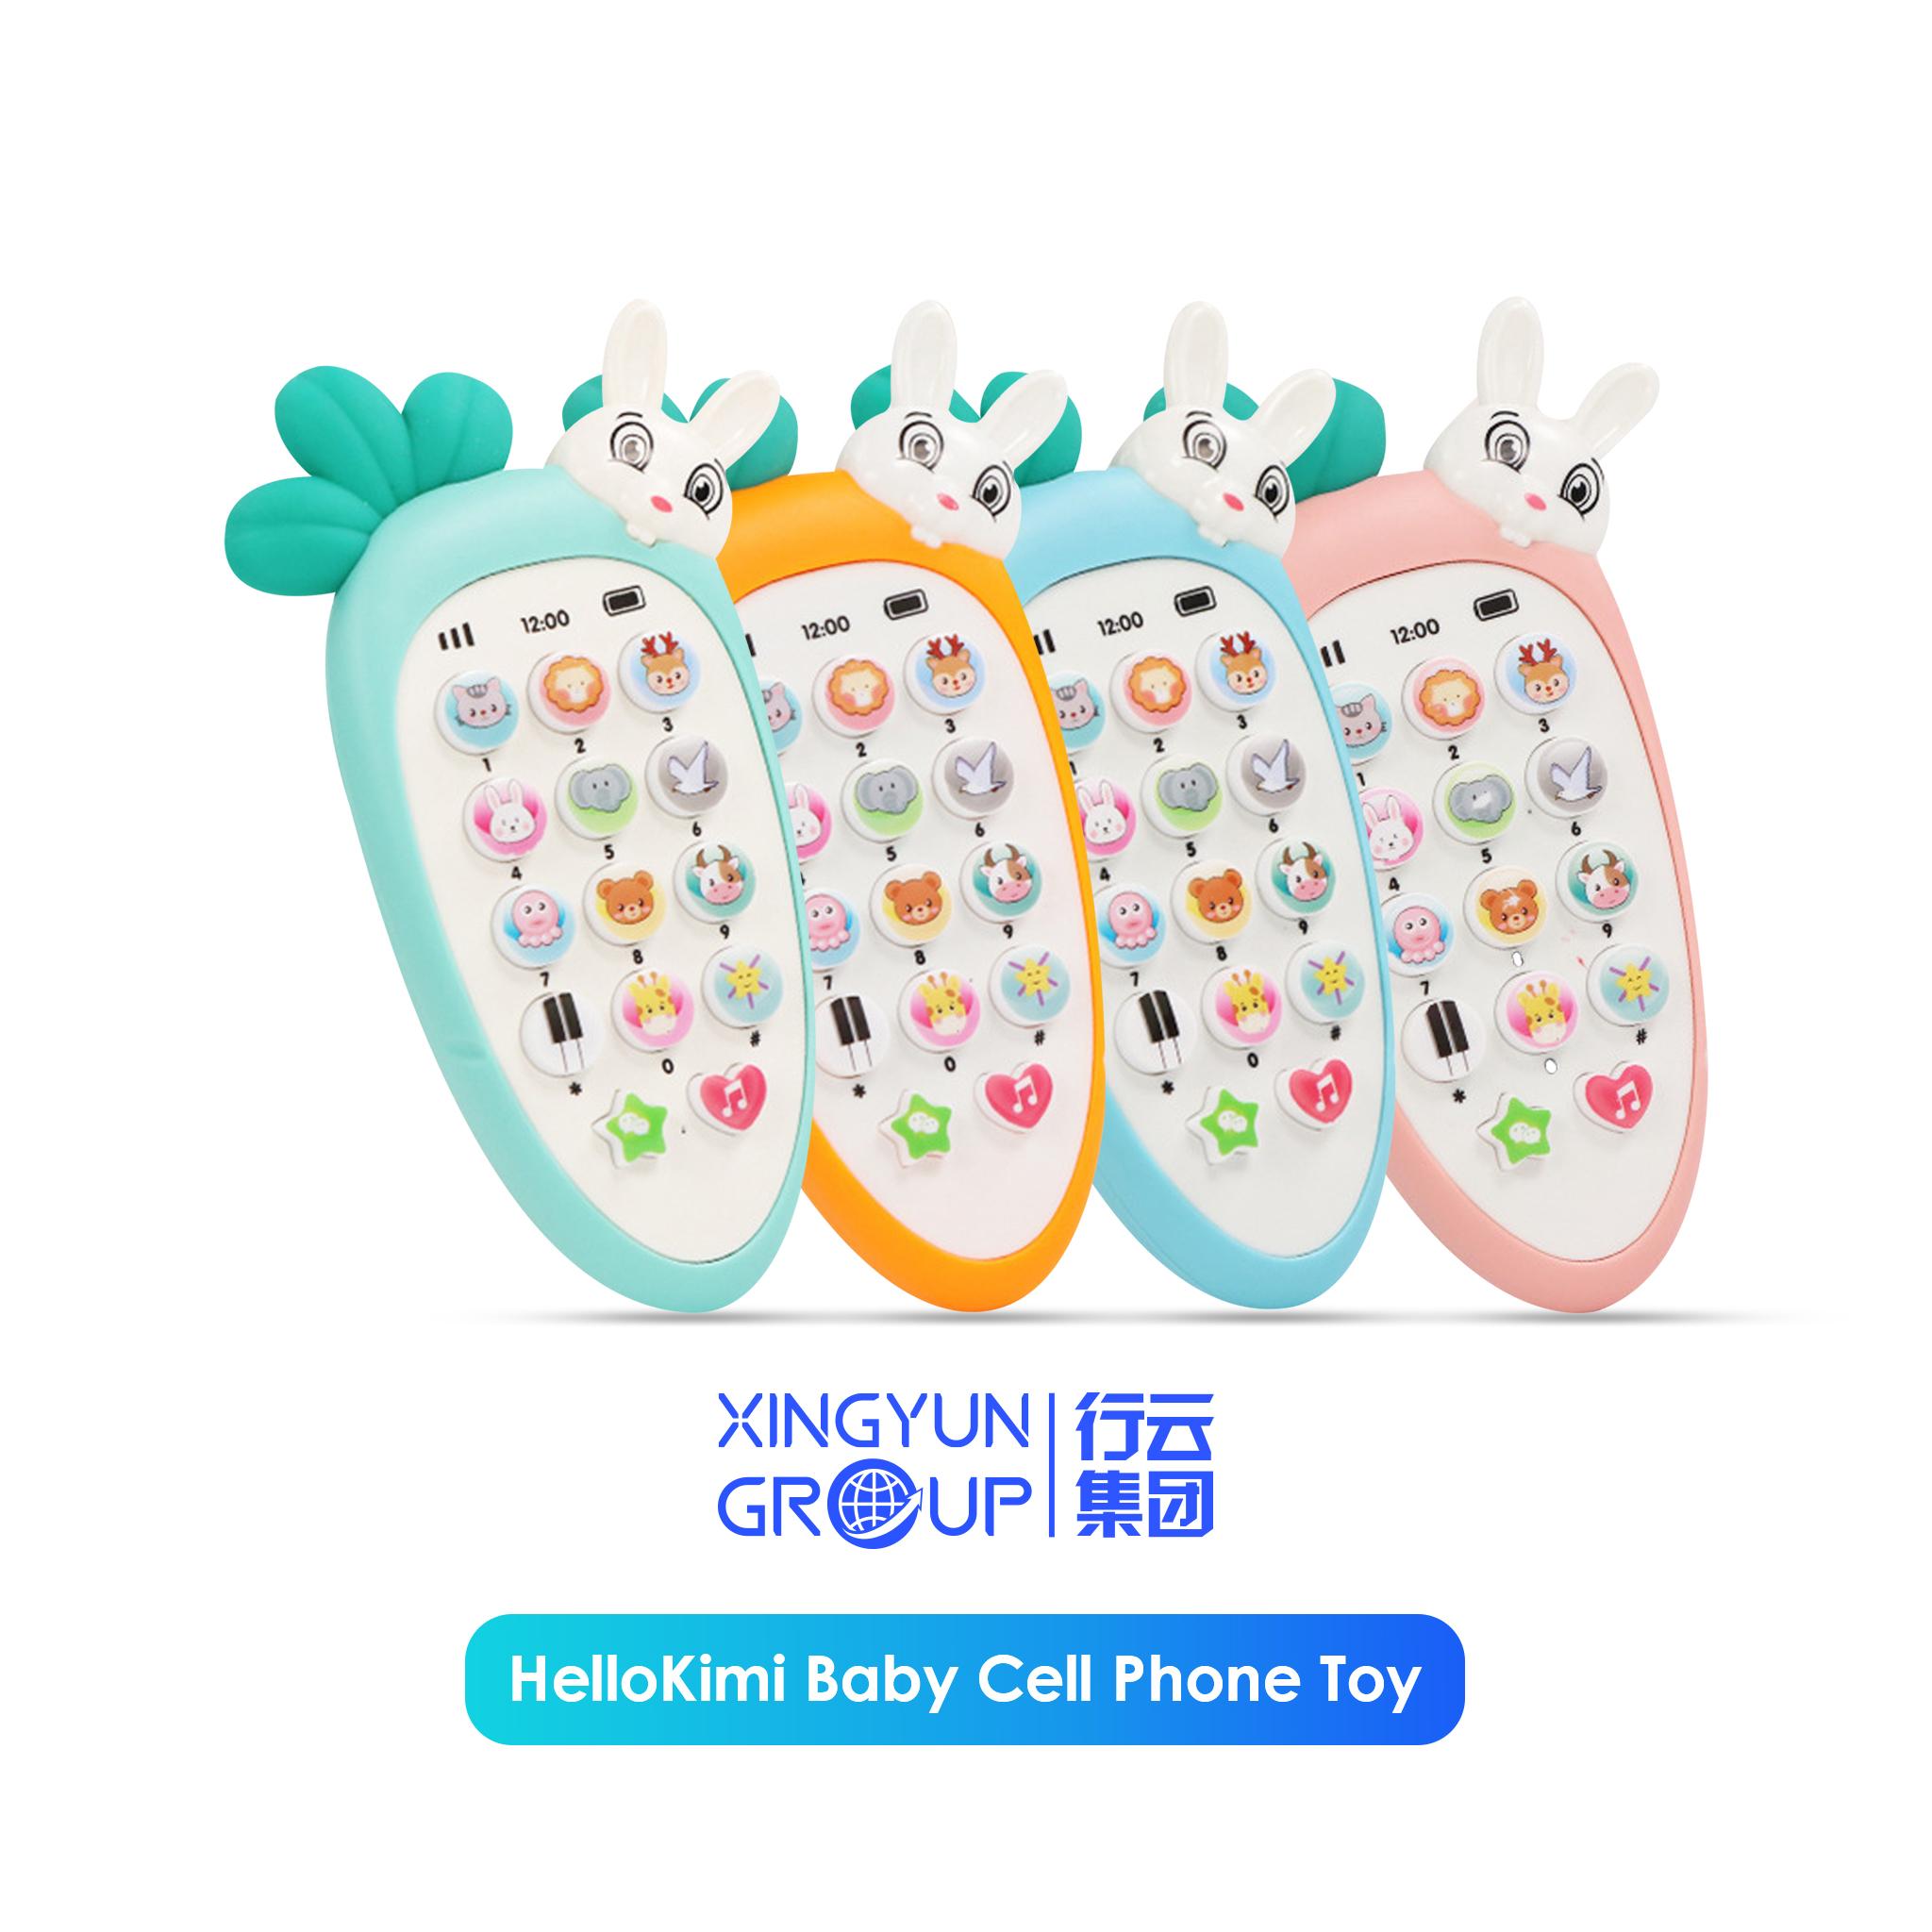 HelloKimi Baby Cell Phone Toy for Learning and Play Early Education Telephone with Silicone Cover Music Lights for 0-1 Year Old Kids with lanyard